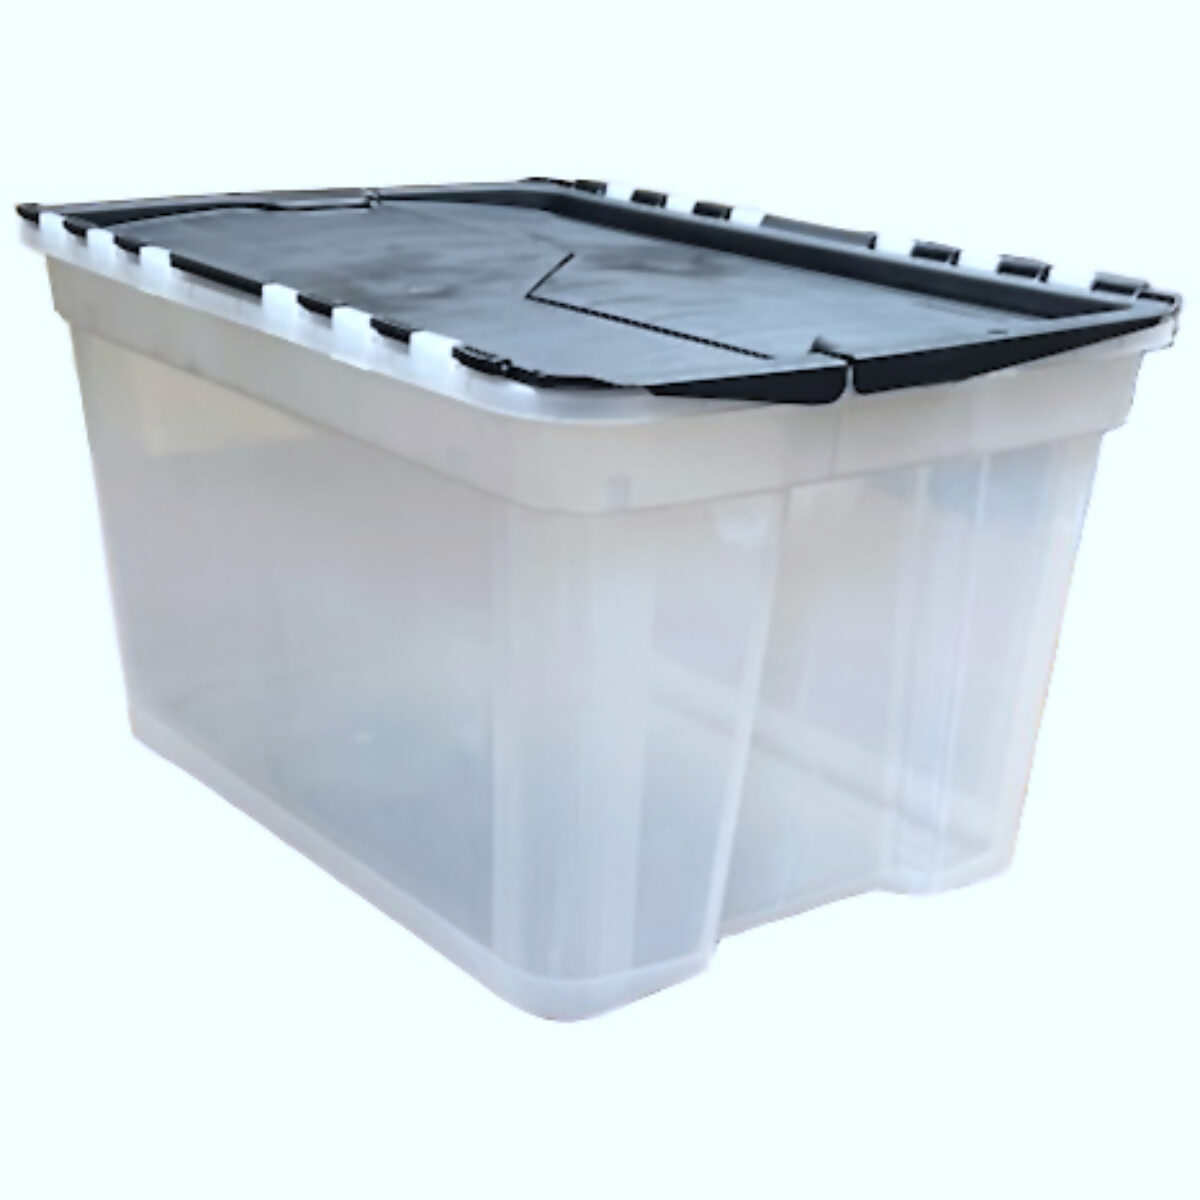 https://doyleshamrock.com/main/wp-content/uploads/schema-and-structured-data-for-wp/15-gallon-clear-tote-1200x1200.jpg